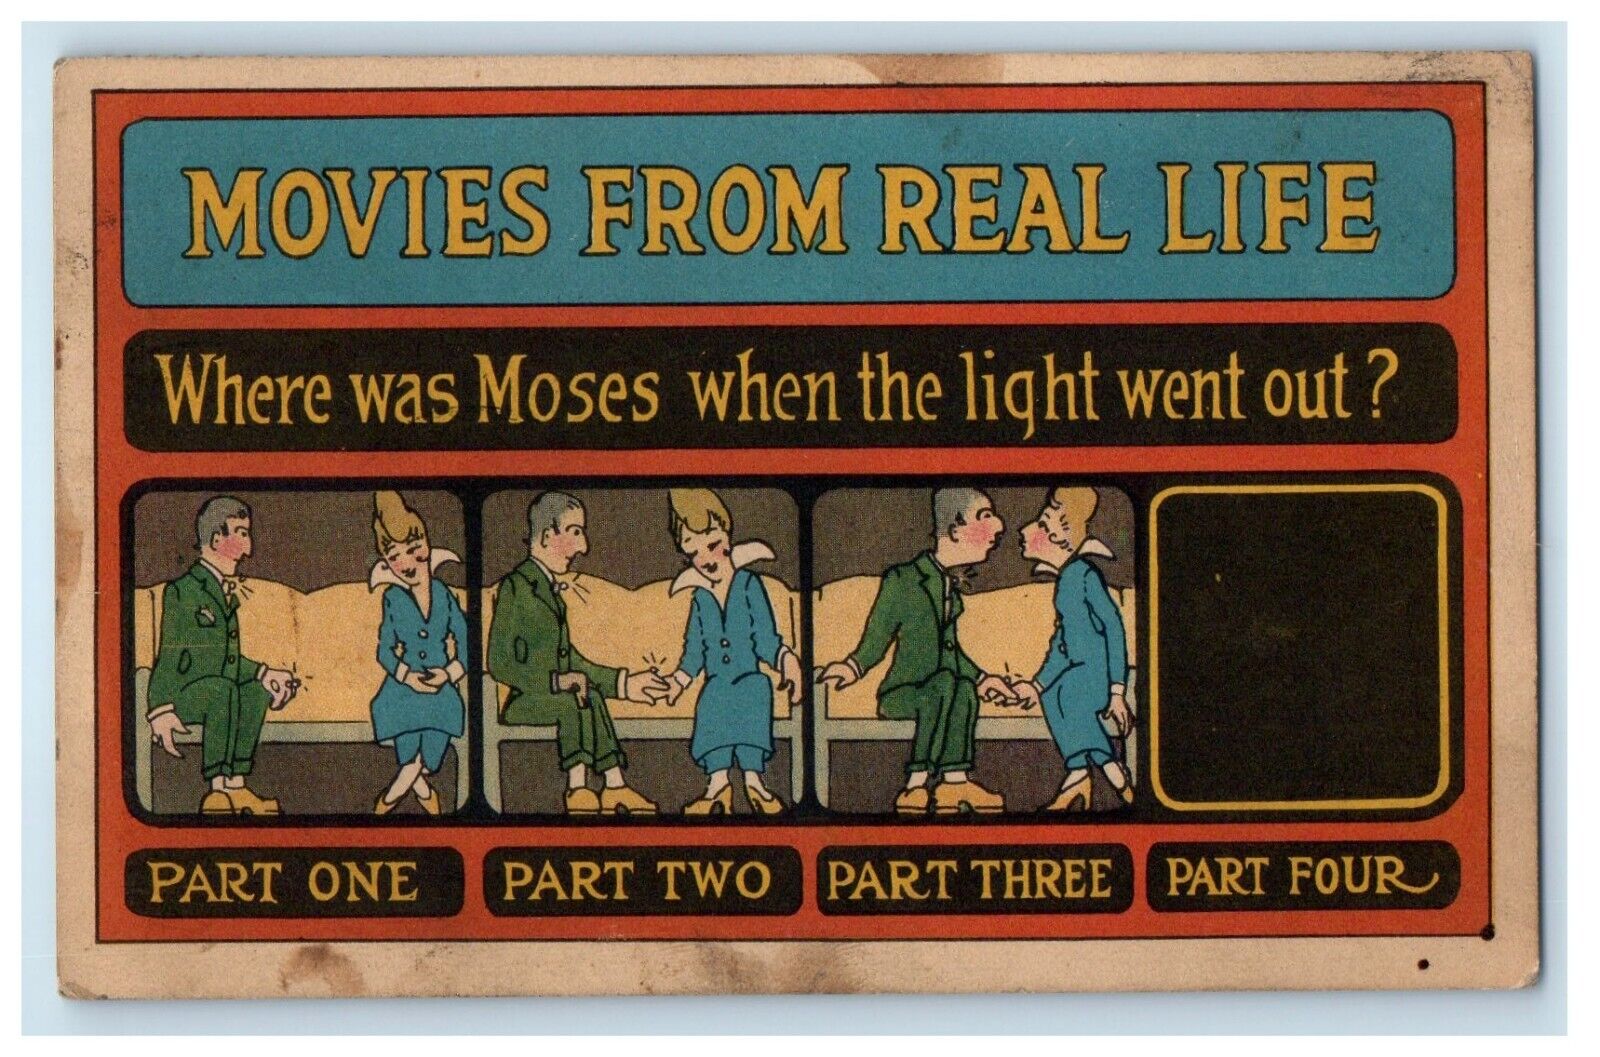 c1910's Movies From Real Time Season Light Went Out Posted Antique Postcard